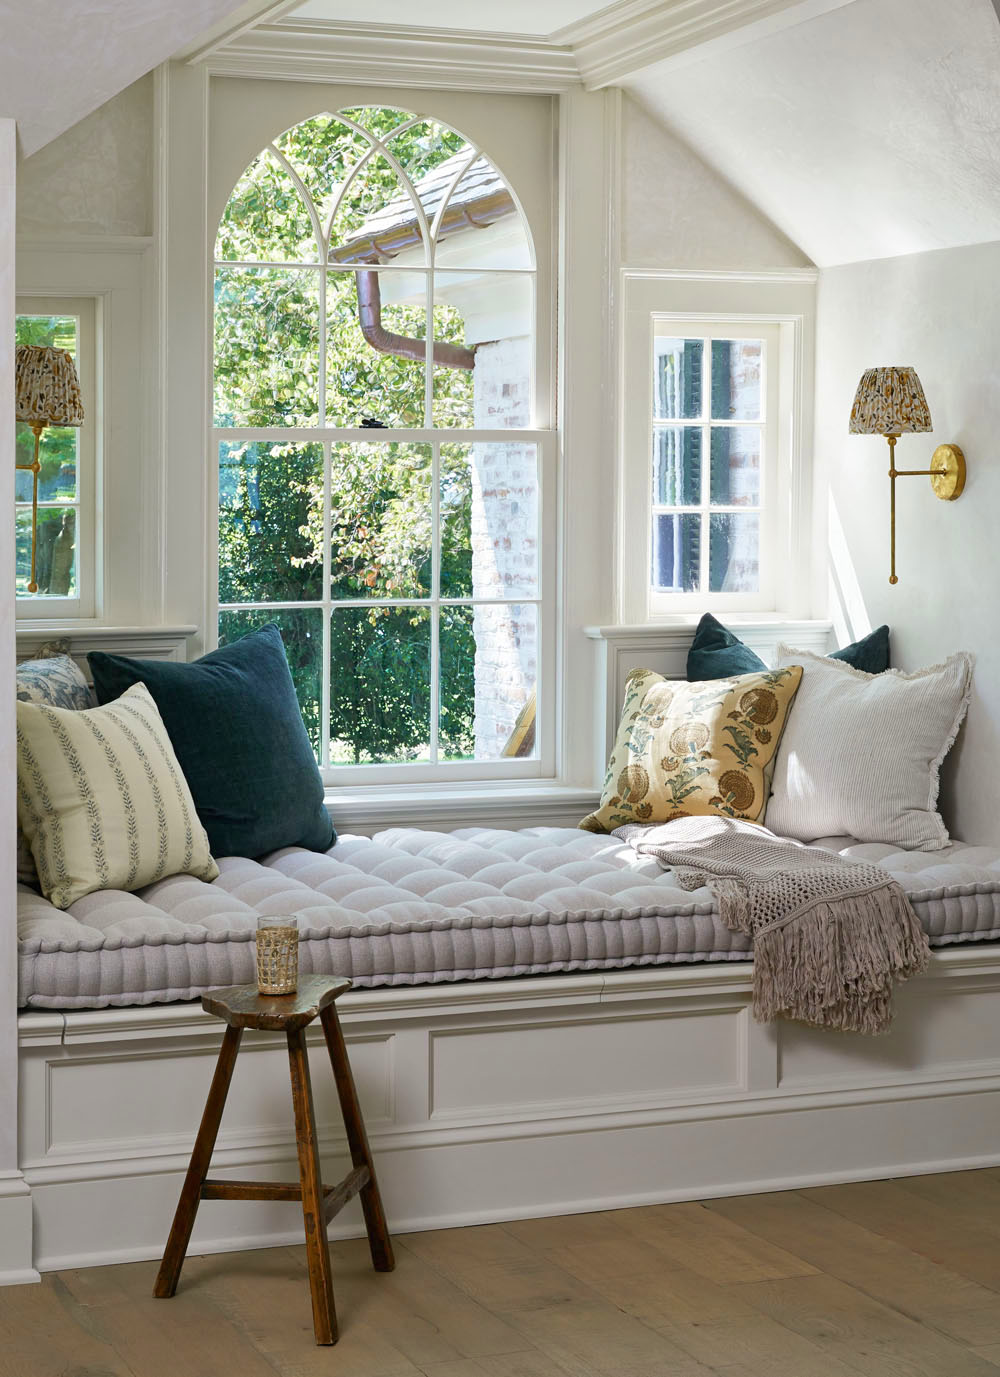 Cozy Sitting Nook with Arched Window and Seating Bench